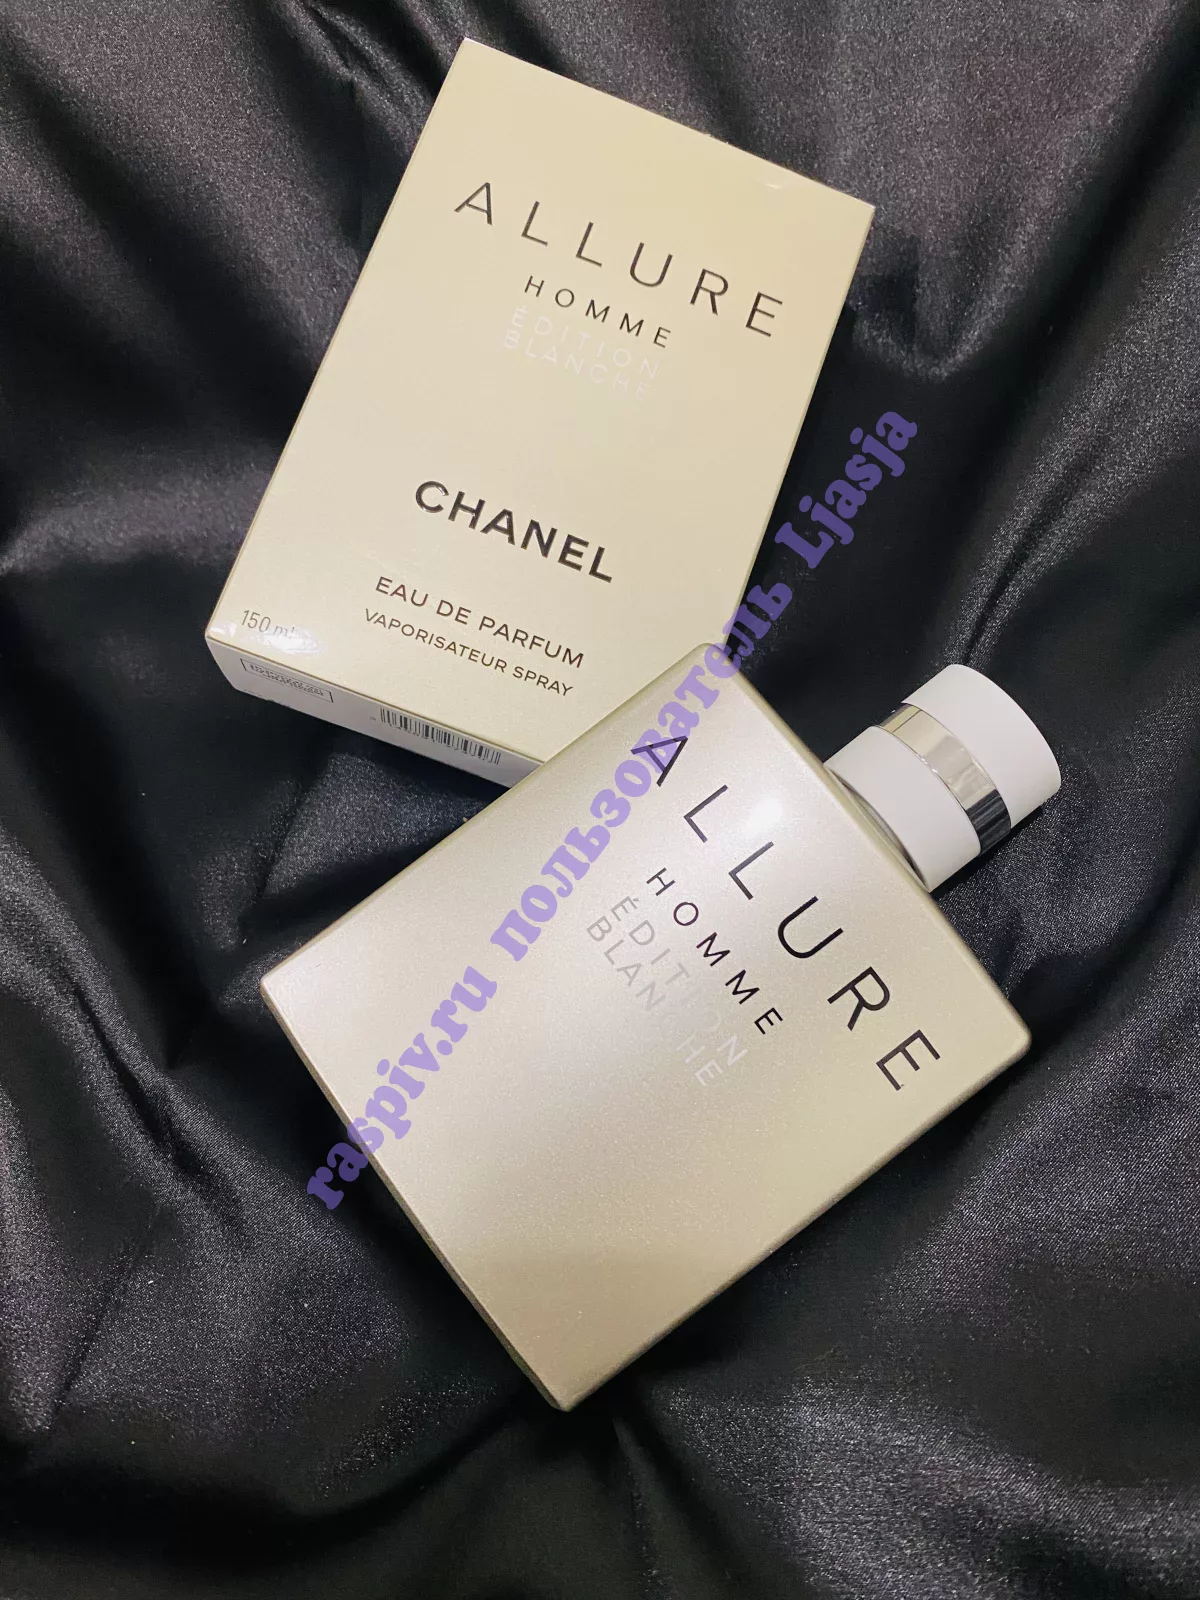 Chanel homme edition. Chanel Allure homme Edition Blanche. Chanel Allure homme Sport Edition Blanche. Парфюмерная вода мужская Chanel Allure homme Edition Blanche. Chanel мужс. Allure homme Edition Blanche 150 ml.